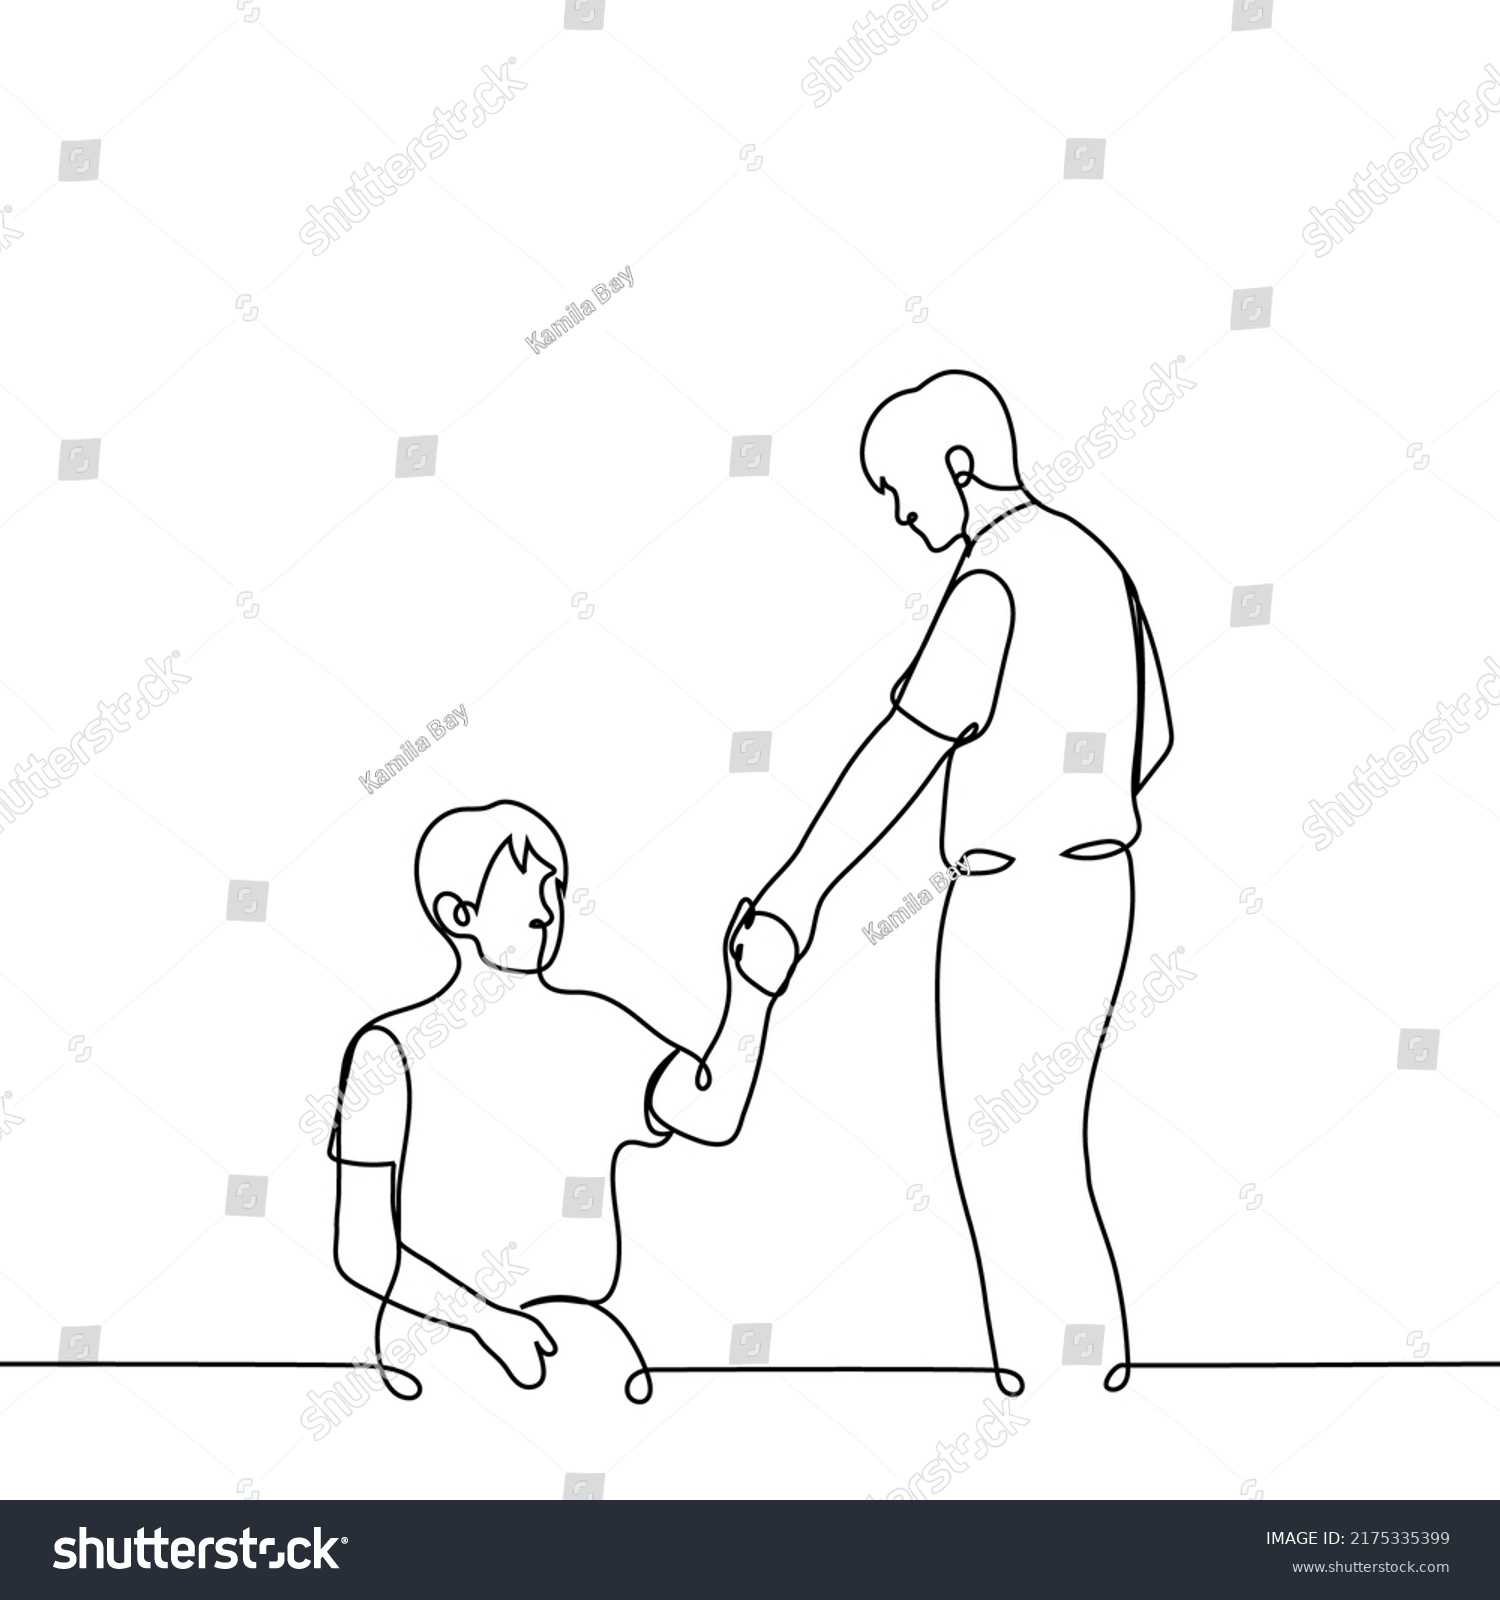 SVG of man standing stretching out his hand to sitting on the floor or ground - one line drawing vector. concept of helping those in need, helping loved ones, compassion and empathy svg